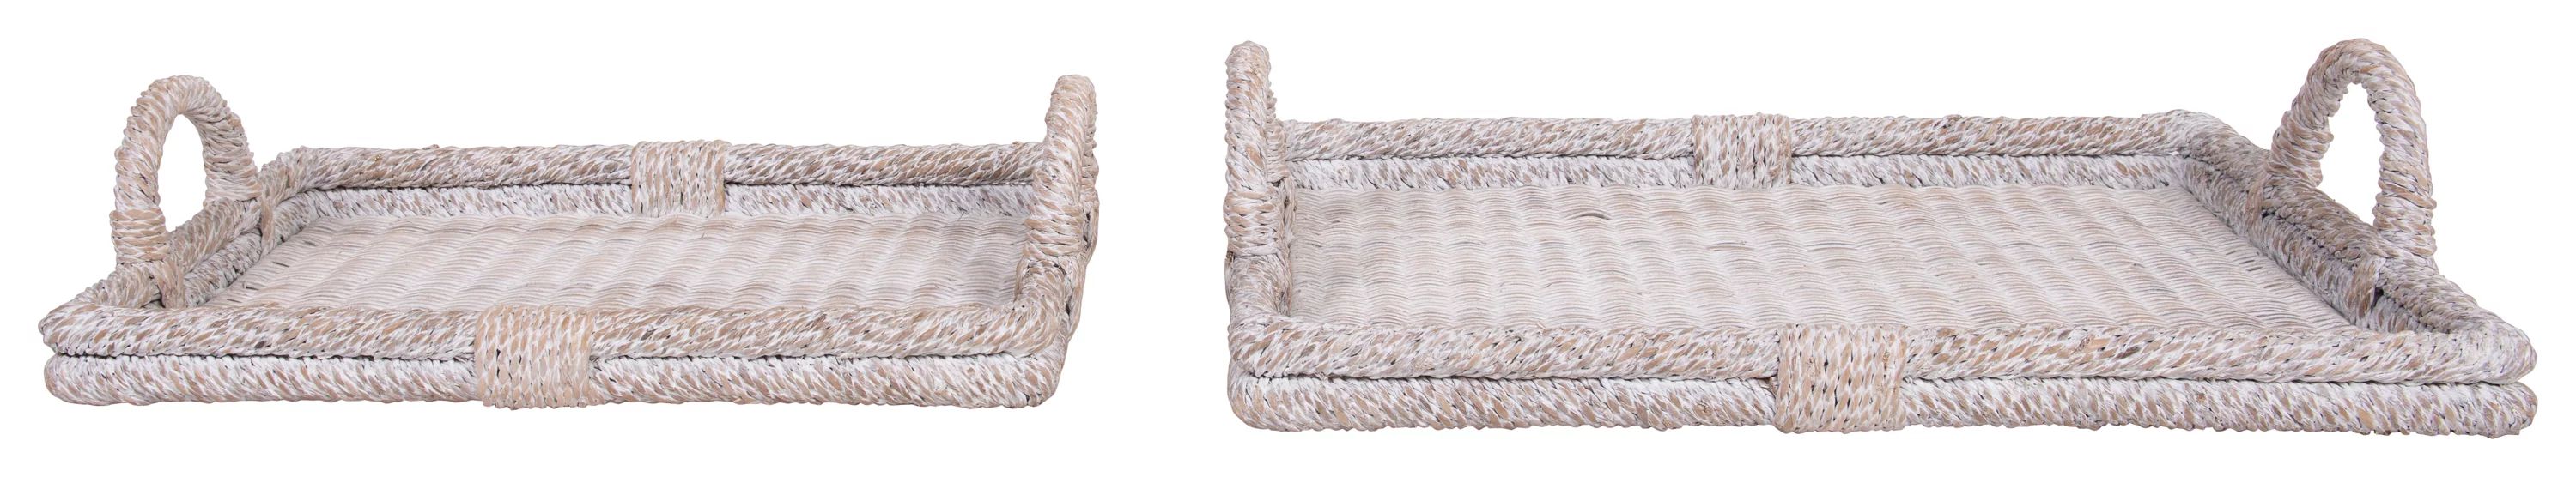 Creative Co-Op Decorative Rattan Trays with Handles & Whitewashed Finish (Set of 2 Sizes) | Walmart (US)